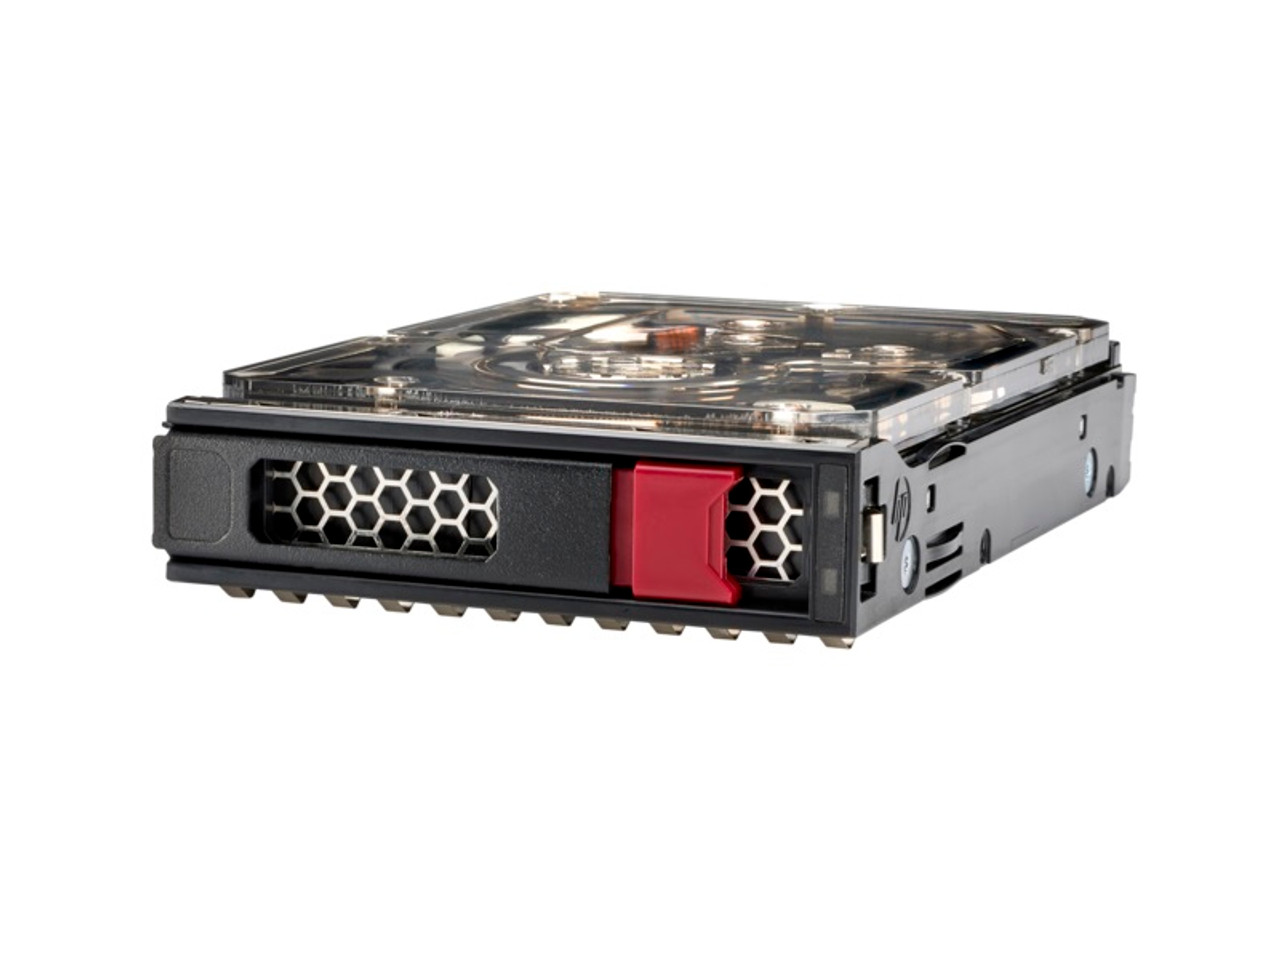 HEP P11186-001 10tb 7200rpm Sas 12gbps Midline Lff (3.5inch) Lp Helium 512e Digitally Signed Firmware Hard Drive With Tray